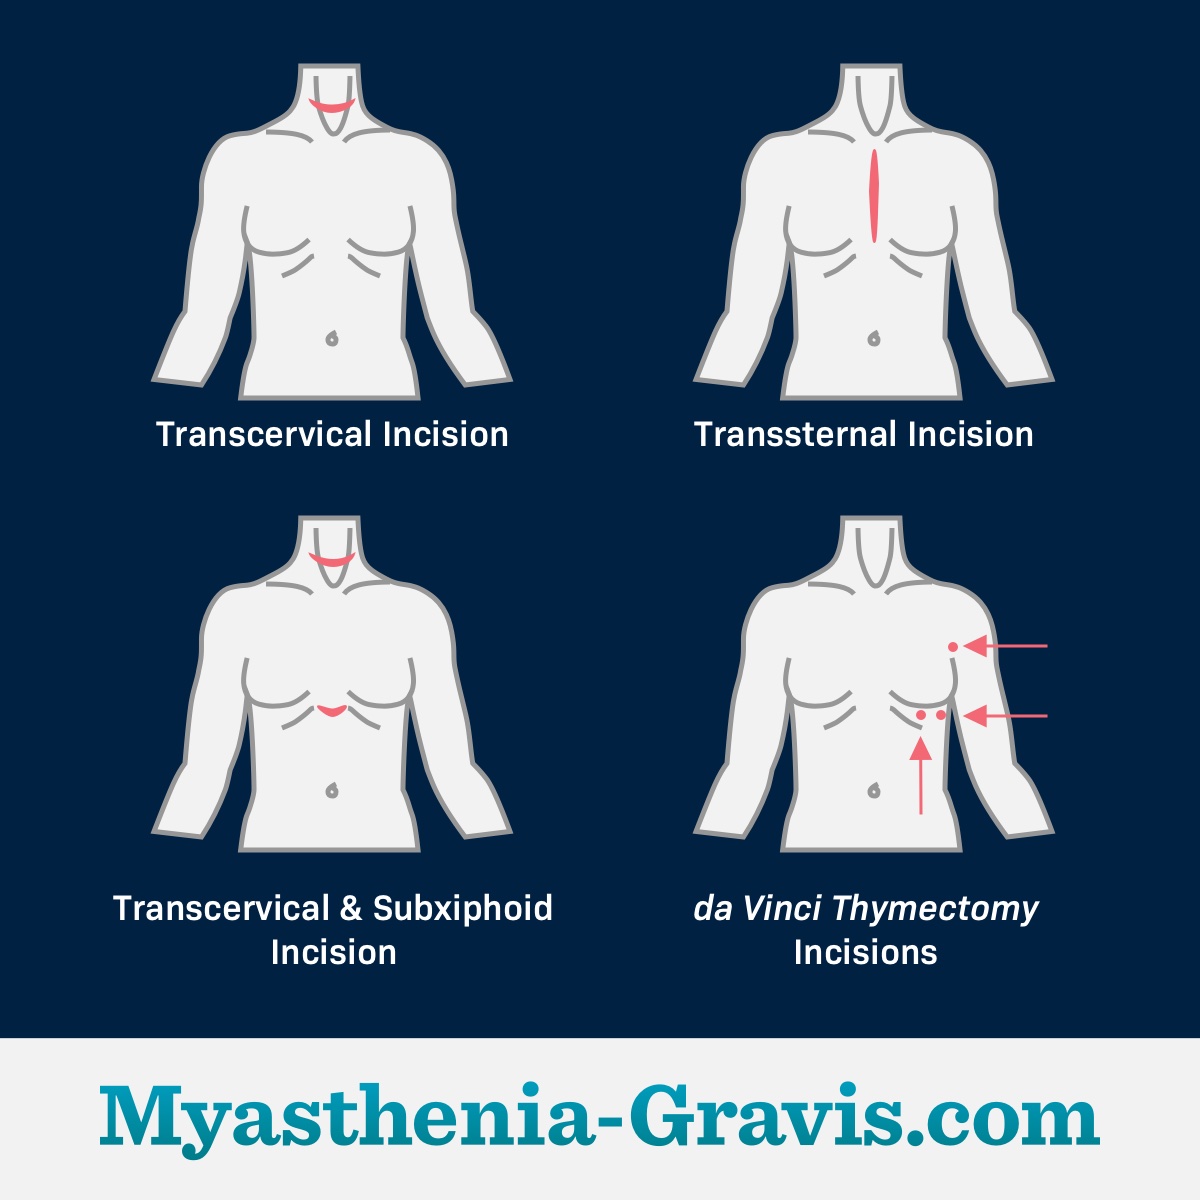 Different types of surgical incisions used in thymectomy for treating myasthenia gravis.